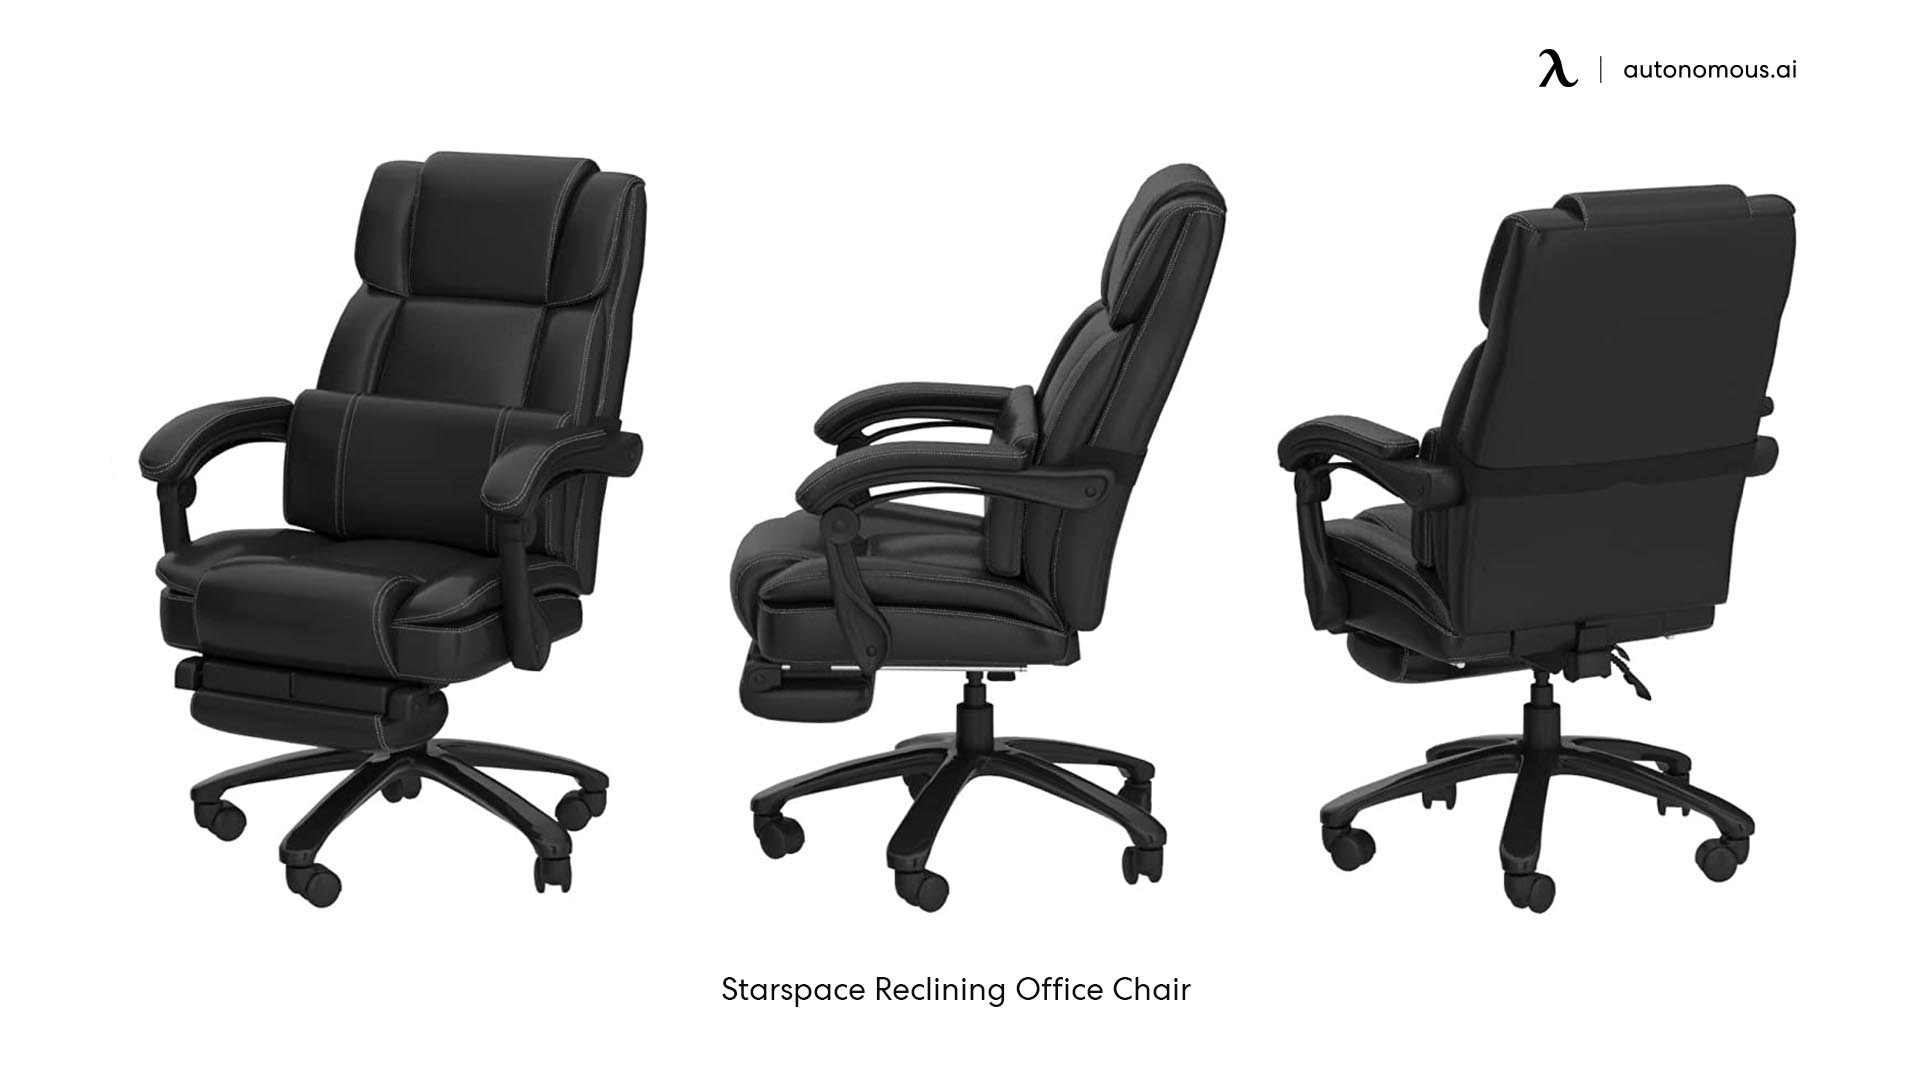 Starspace Reclining heavy duty office chairs